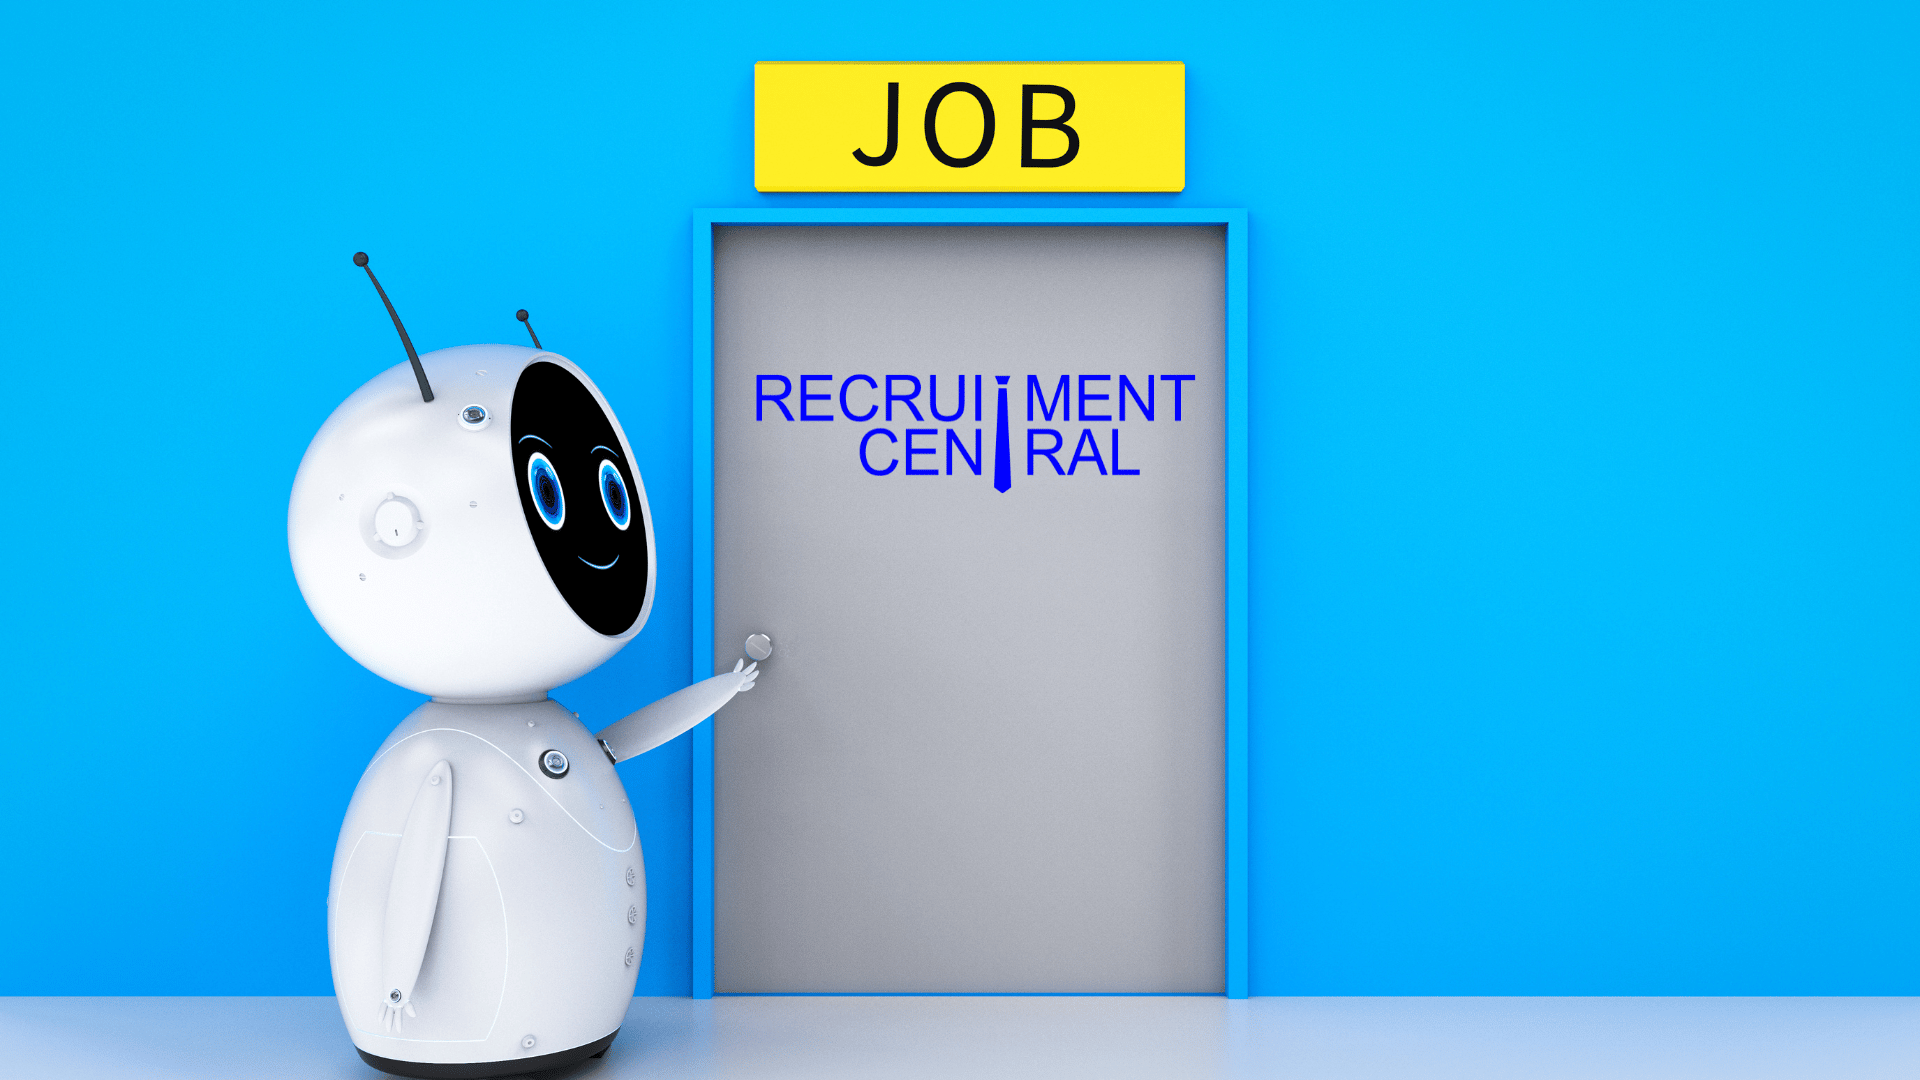 The image displays a AI Bot standing near a closed door holding th knob of the door. On the door recruitment central is written and above the blog a yellow tag with JOB written on it is written. The image depicts ai hiring with Recruitment Central.